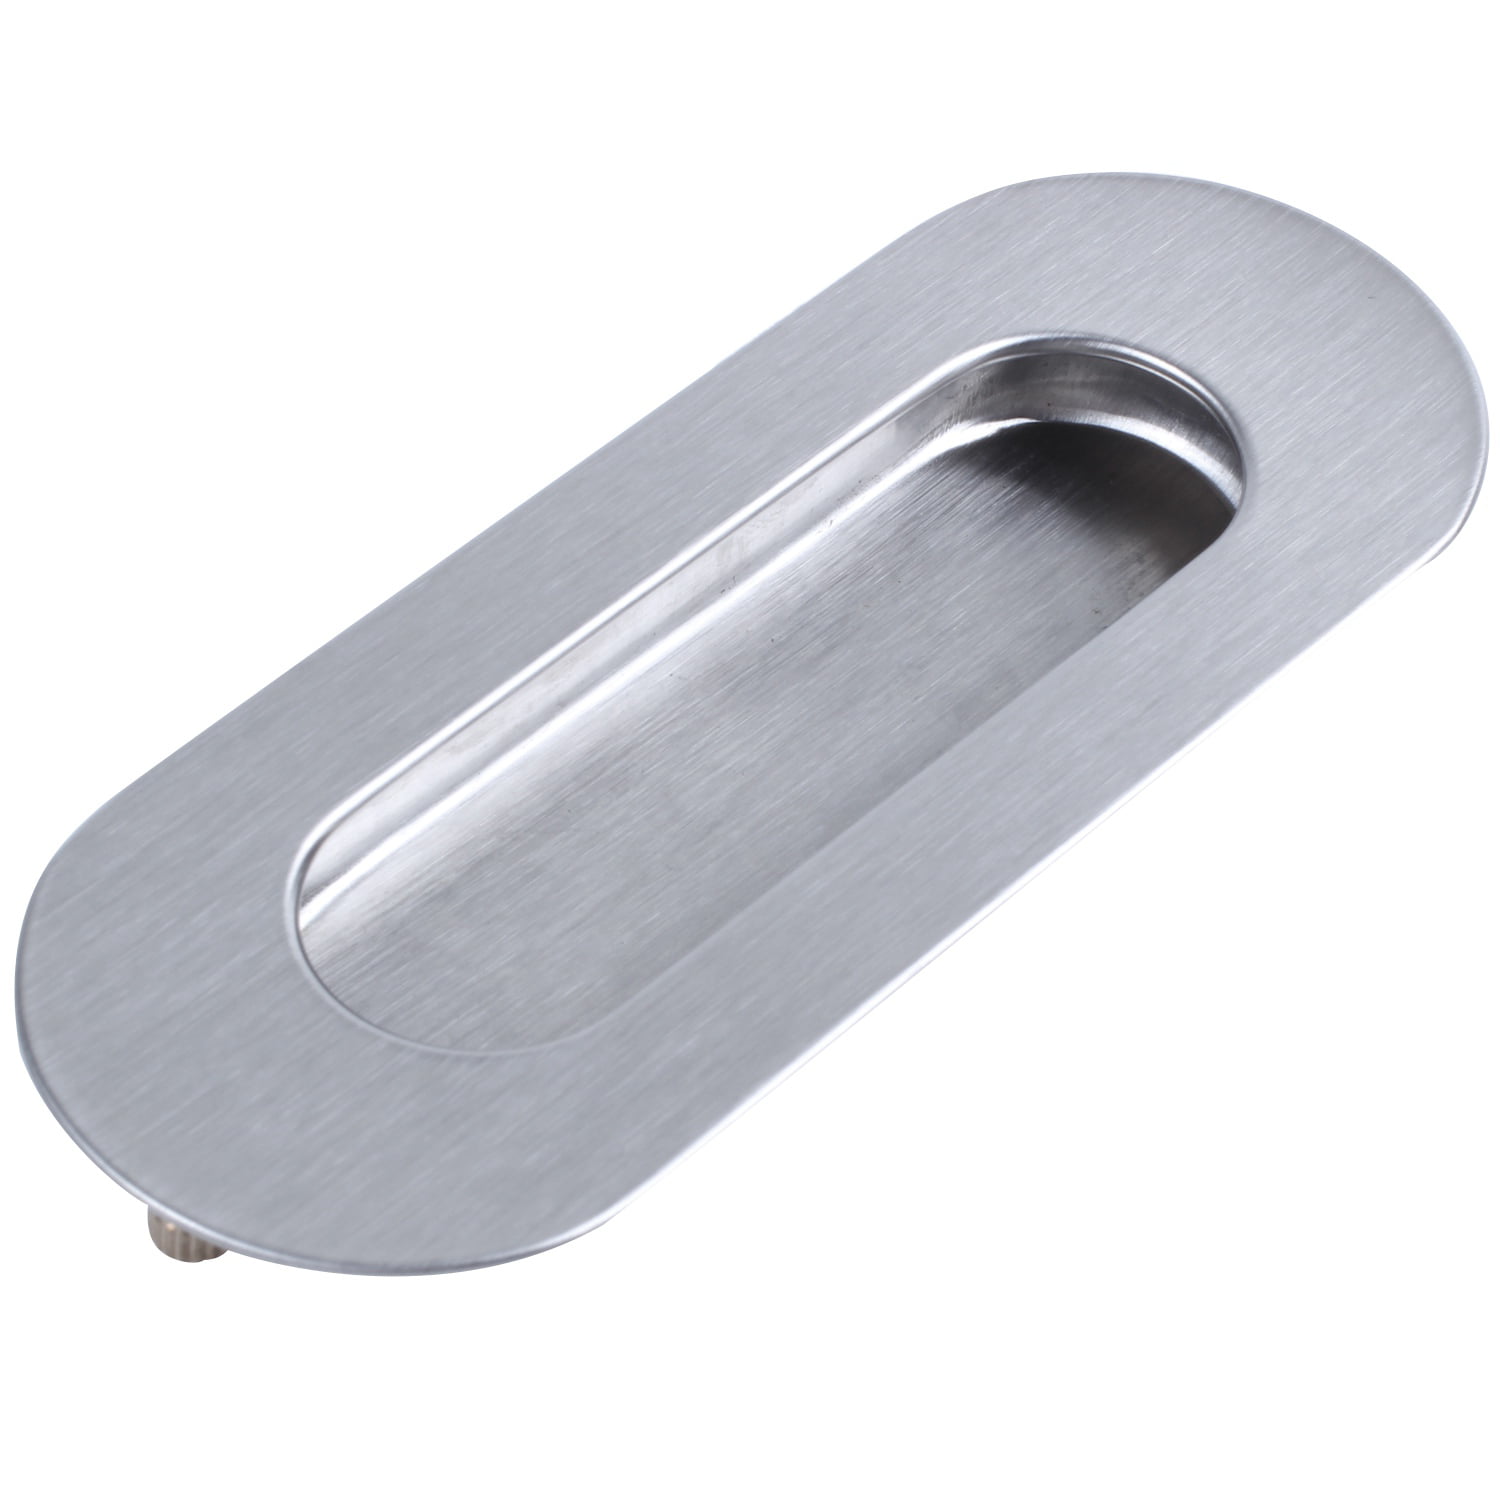 Stainless Steel Oval Recessed Flush Pull Sliding Door Cabinet Handle 2x Screws 